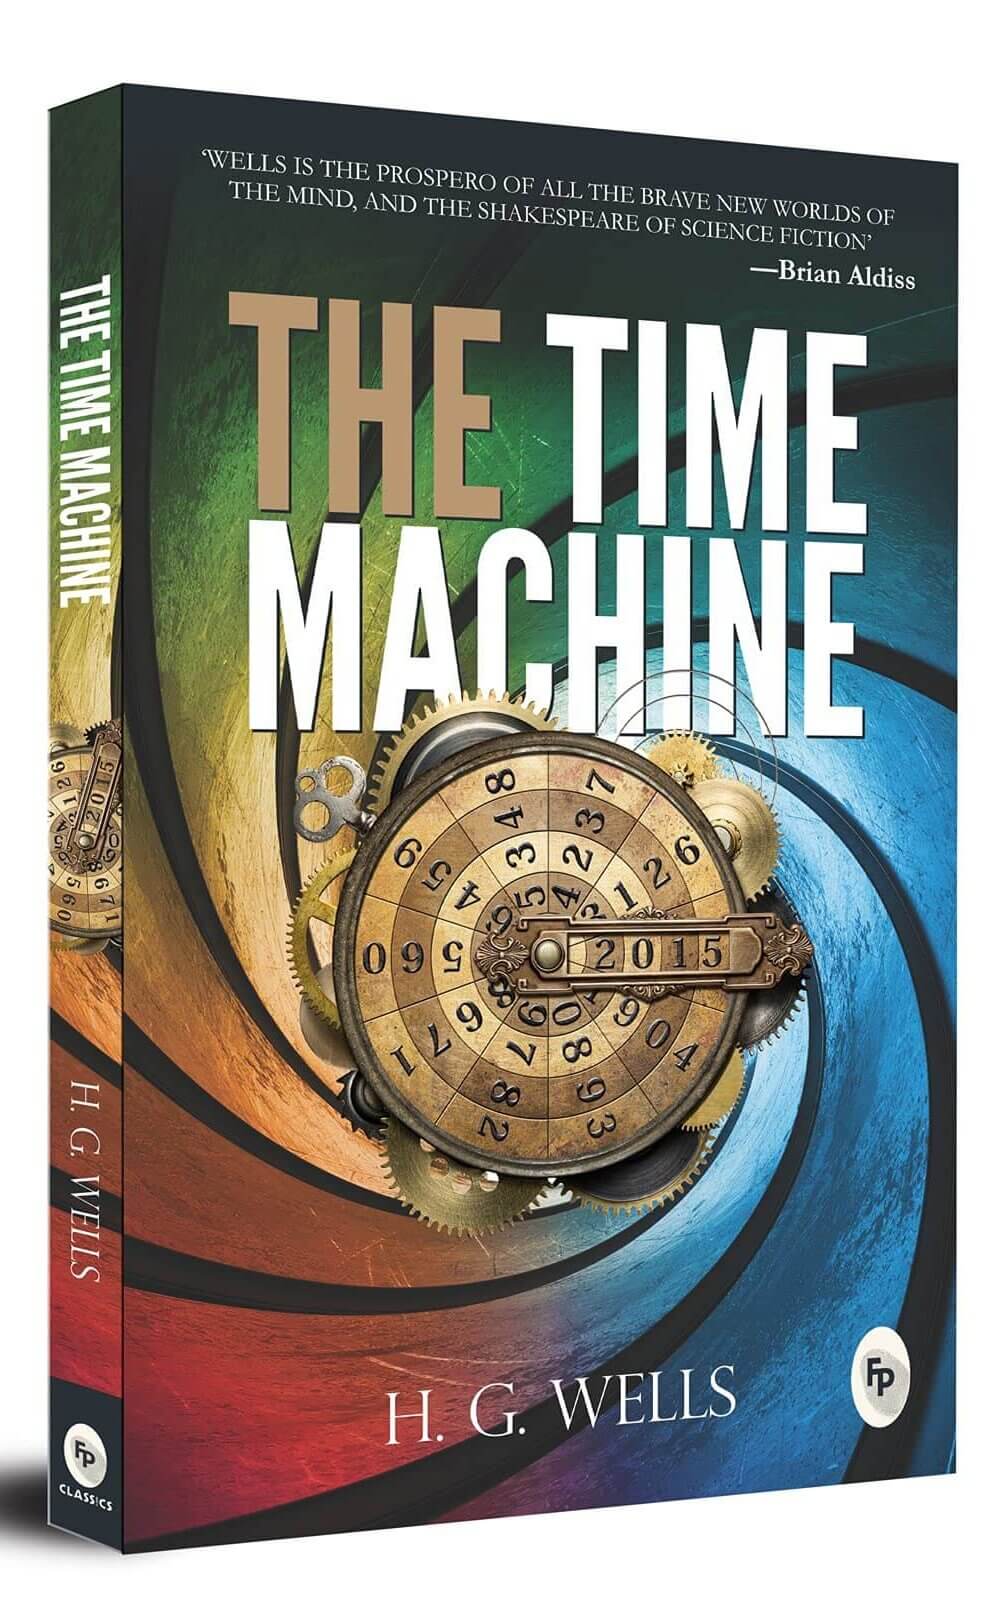 “The Time Machine” (1895) by H.G. Wells